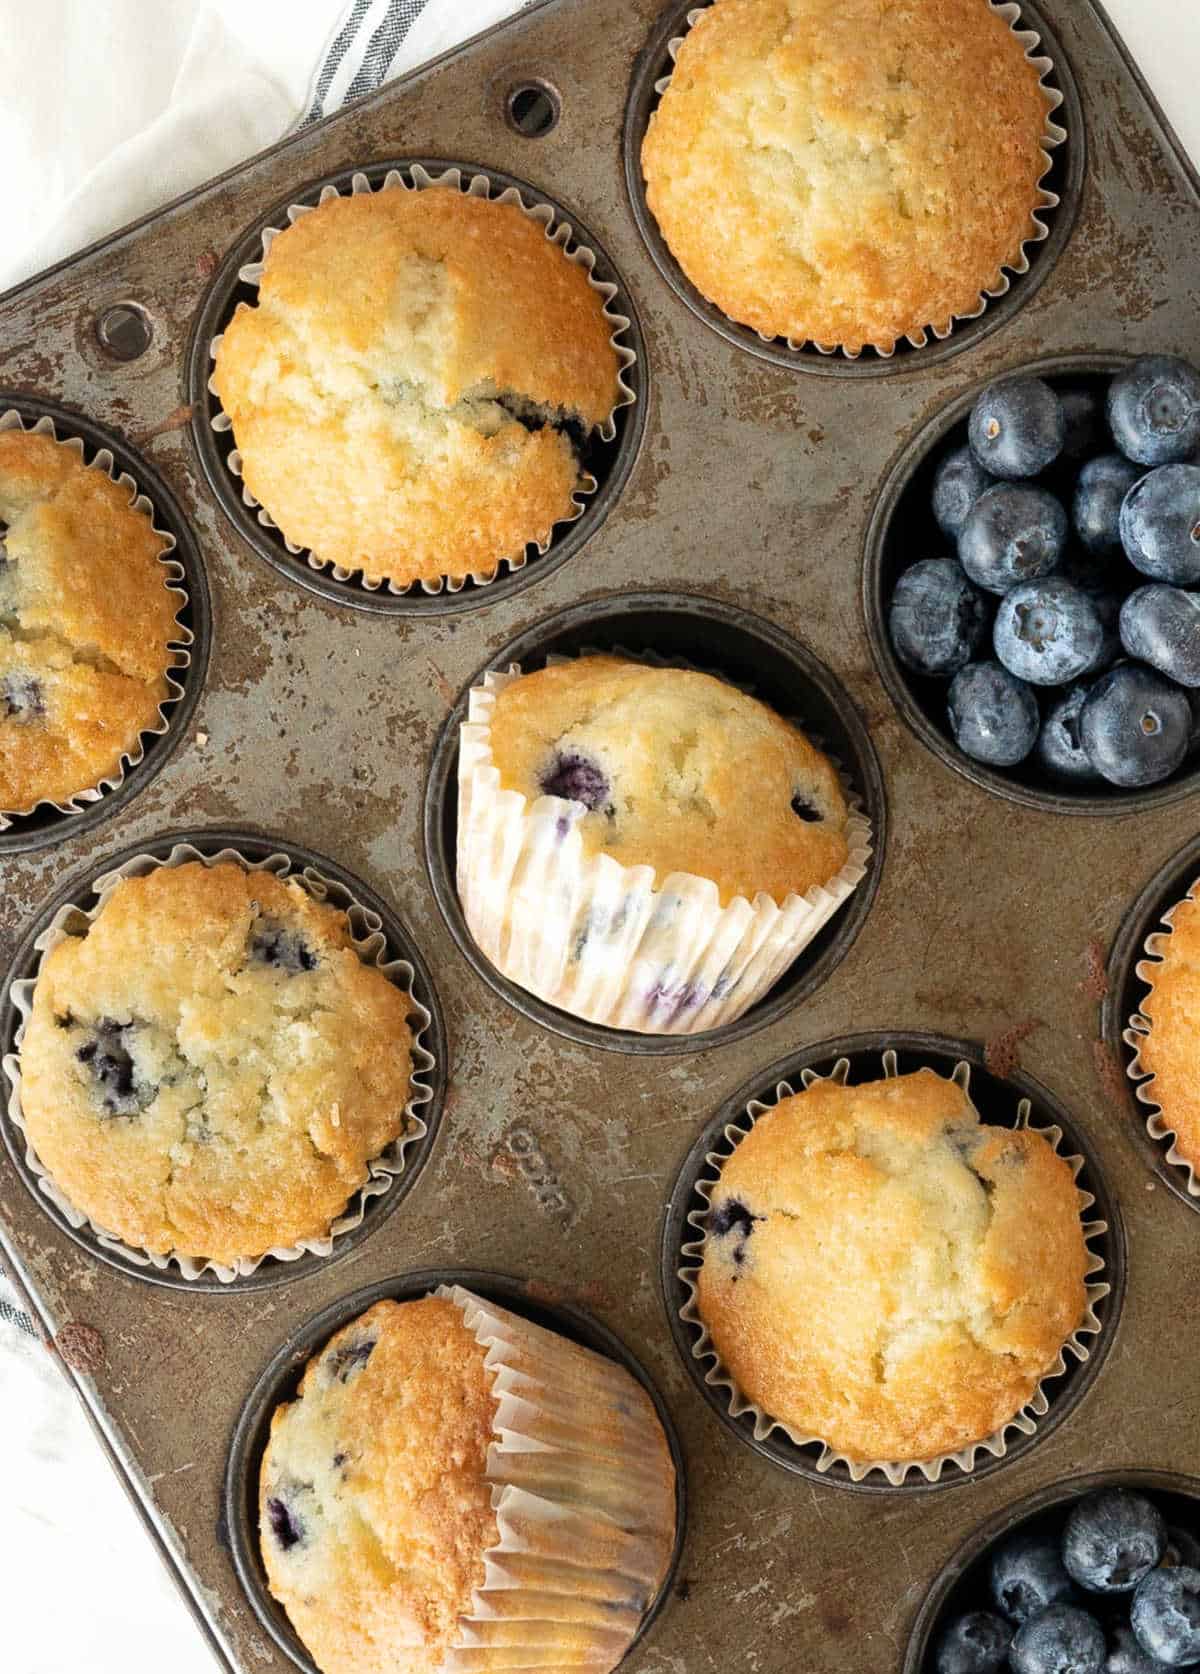 Baked blueberry muffins in paper liner in a dark metal pan. Fresh blueberries.